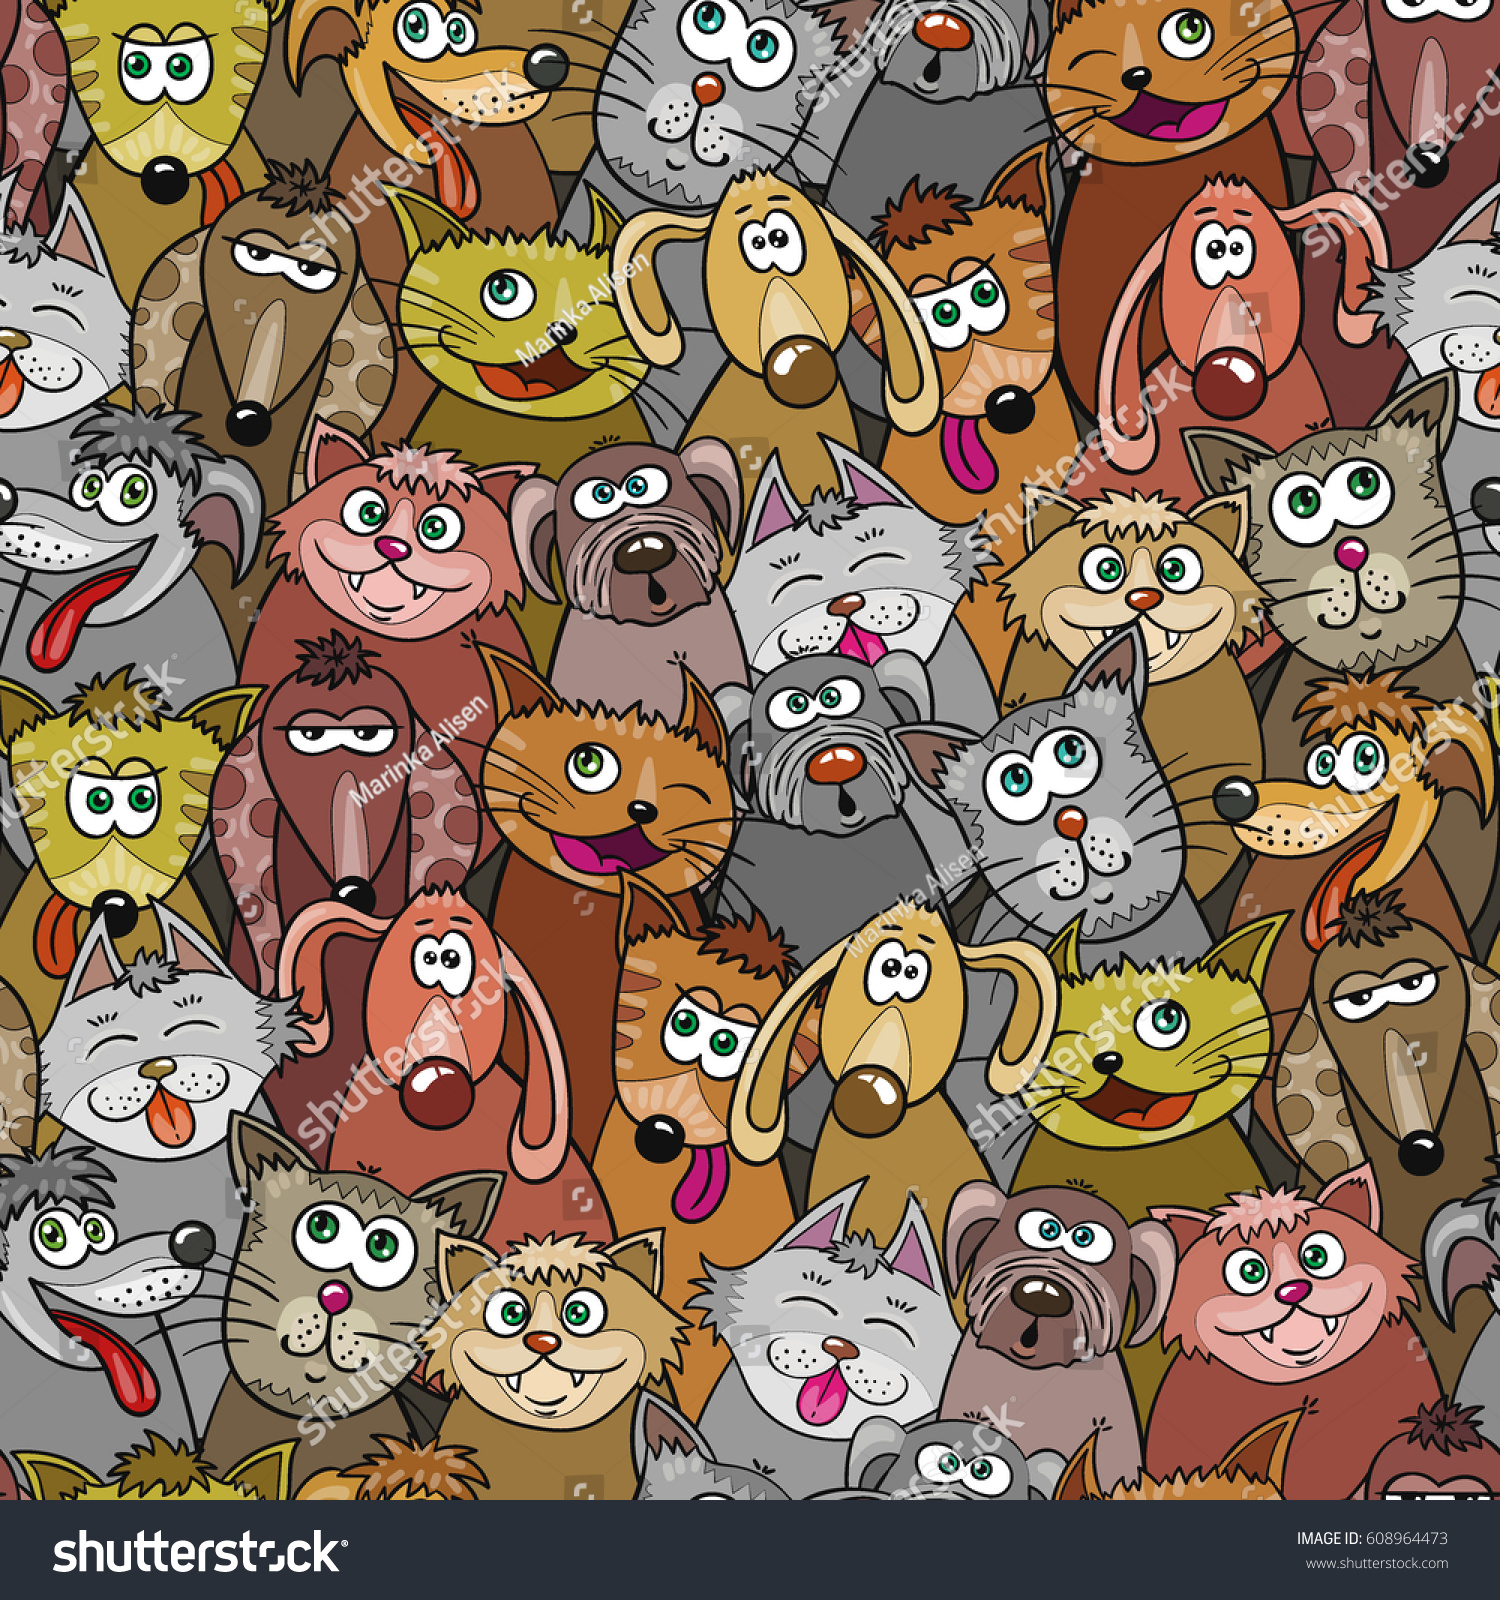 Cats Dogs Seamless Background Kitten Puppy Stock Vector (Royalty Free) 608964473 - Shutterstock